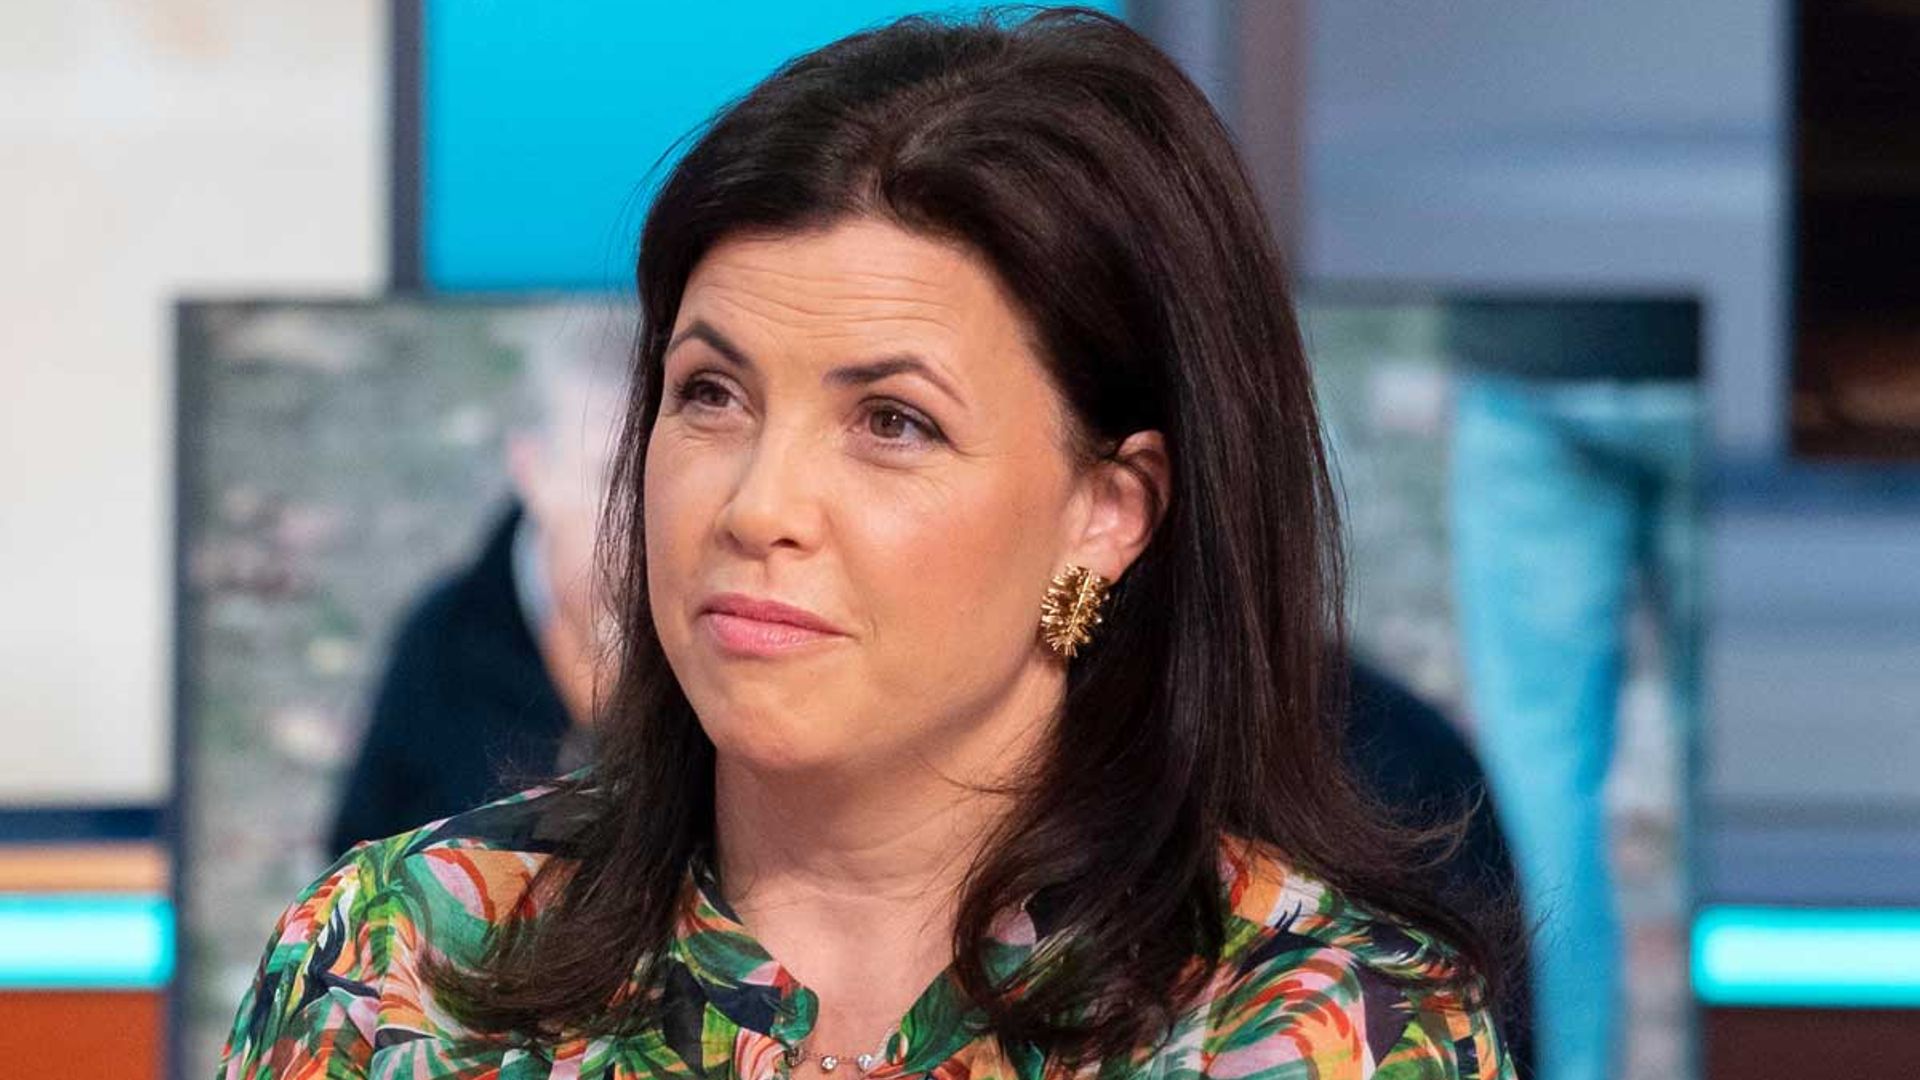 Kirstie Allsopp S Fans In Disbelief After Household Accident Fans Are In Shock Hello